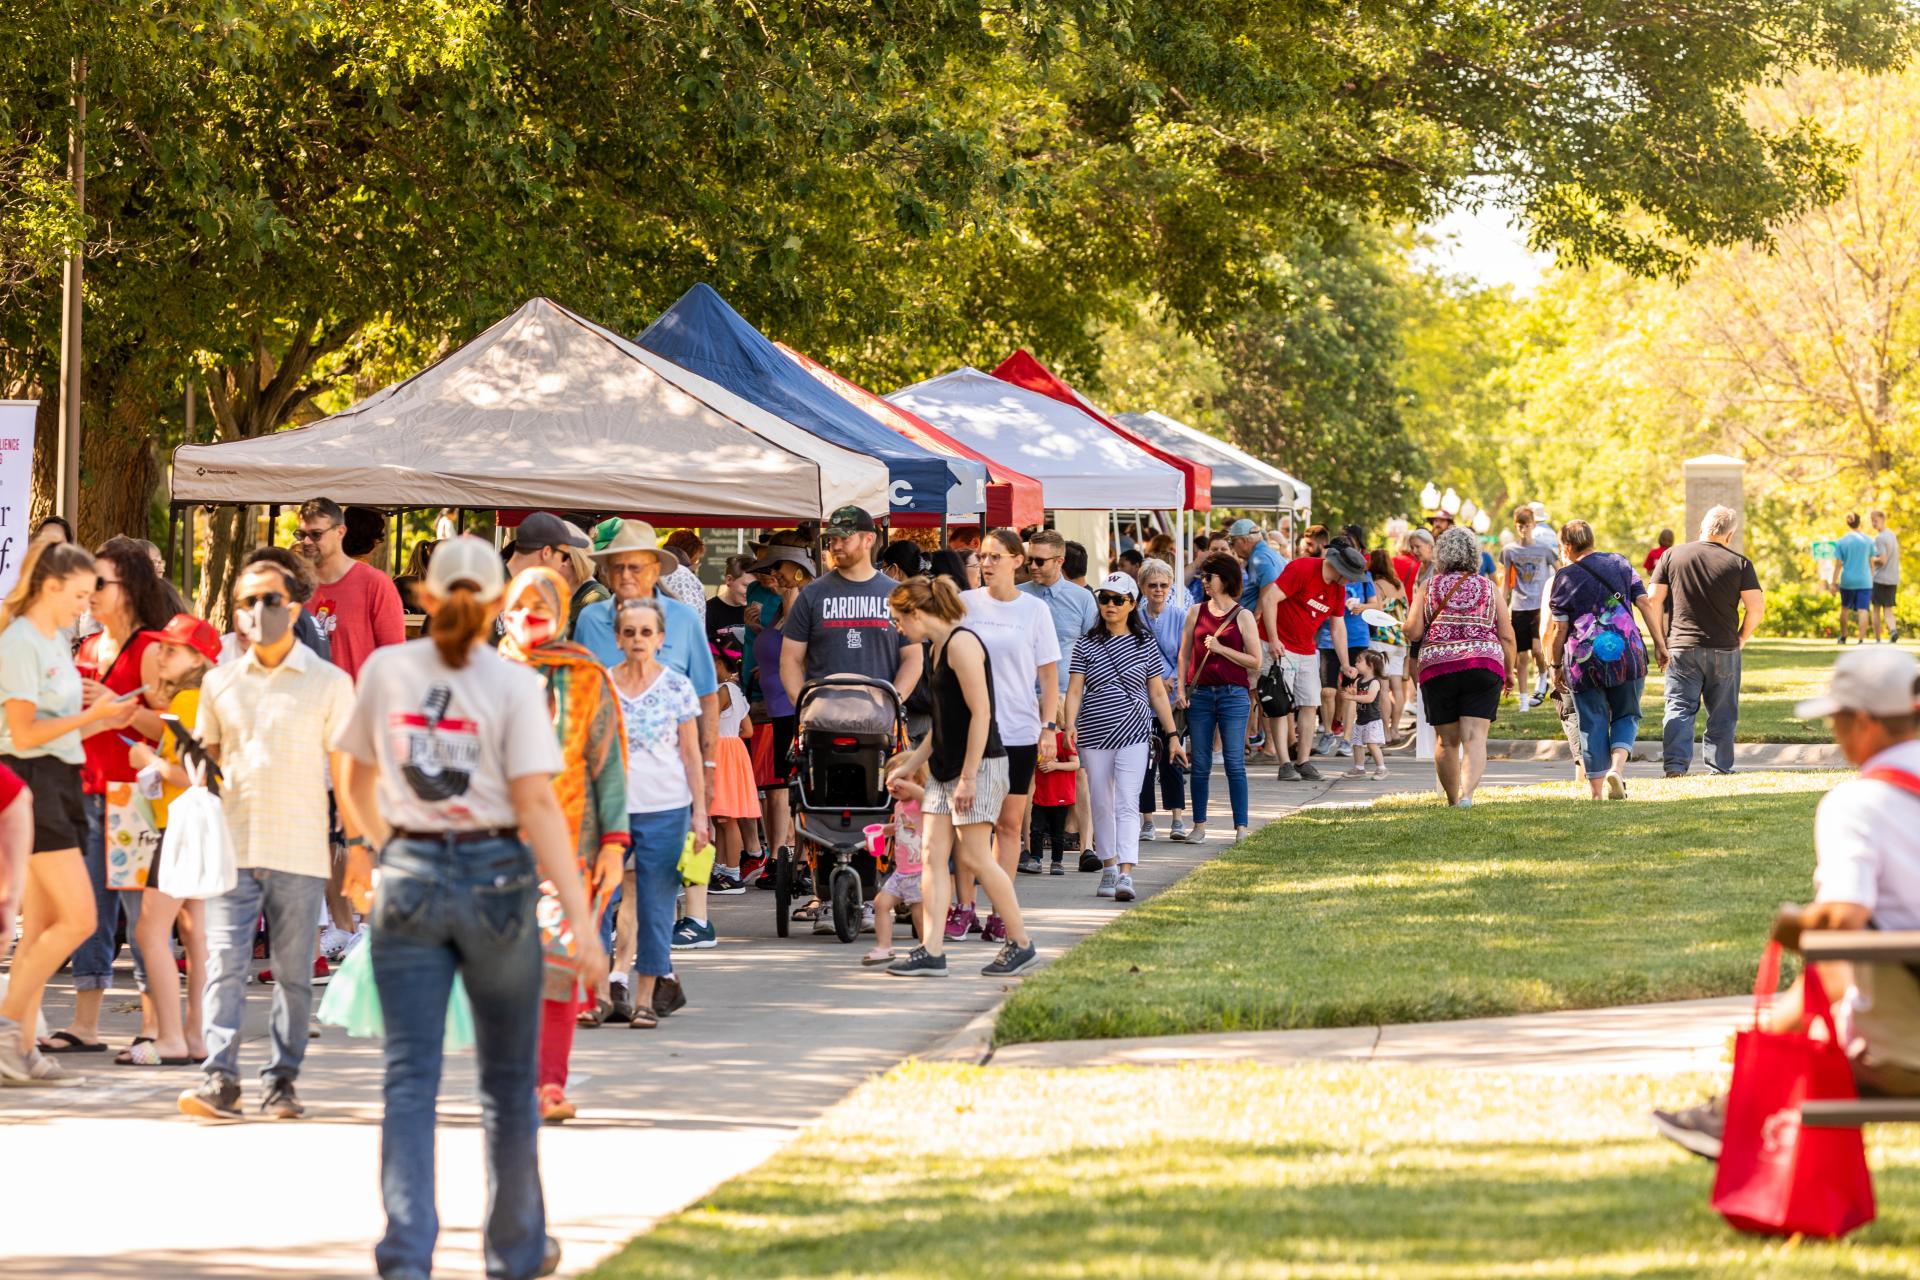 Patrons enjoy the East Campus Discovery Days and Farmer's Market.